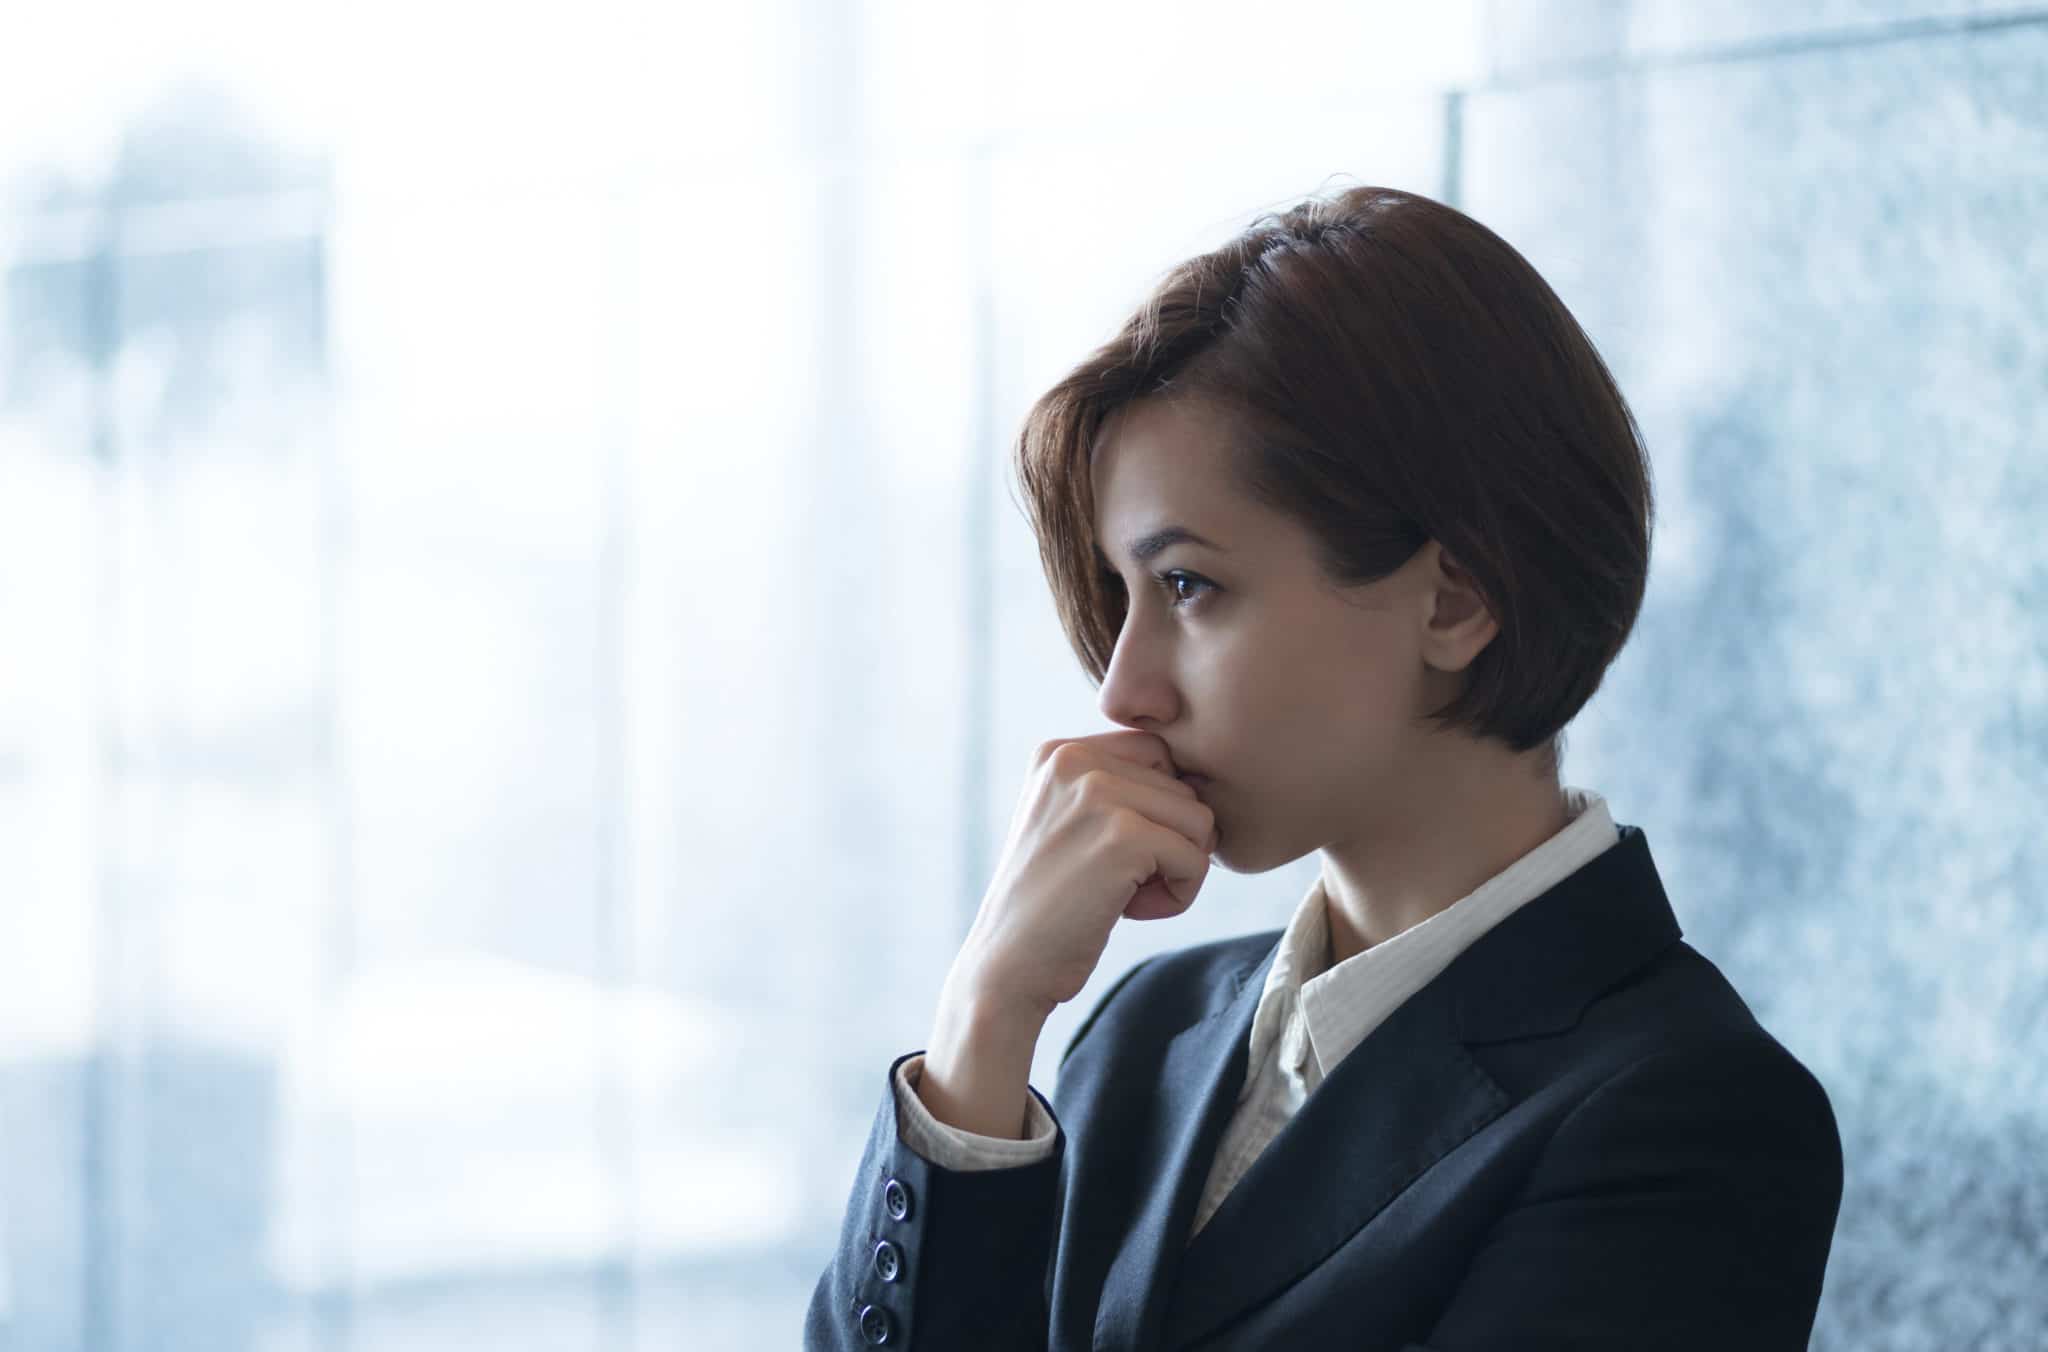 Business women with short dark hair and blue suit seriously pondering a question